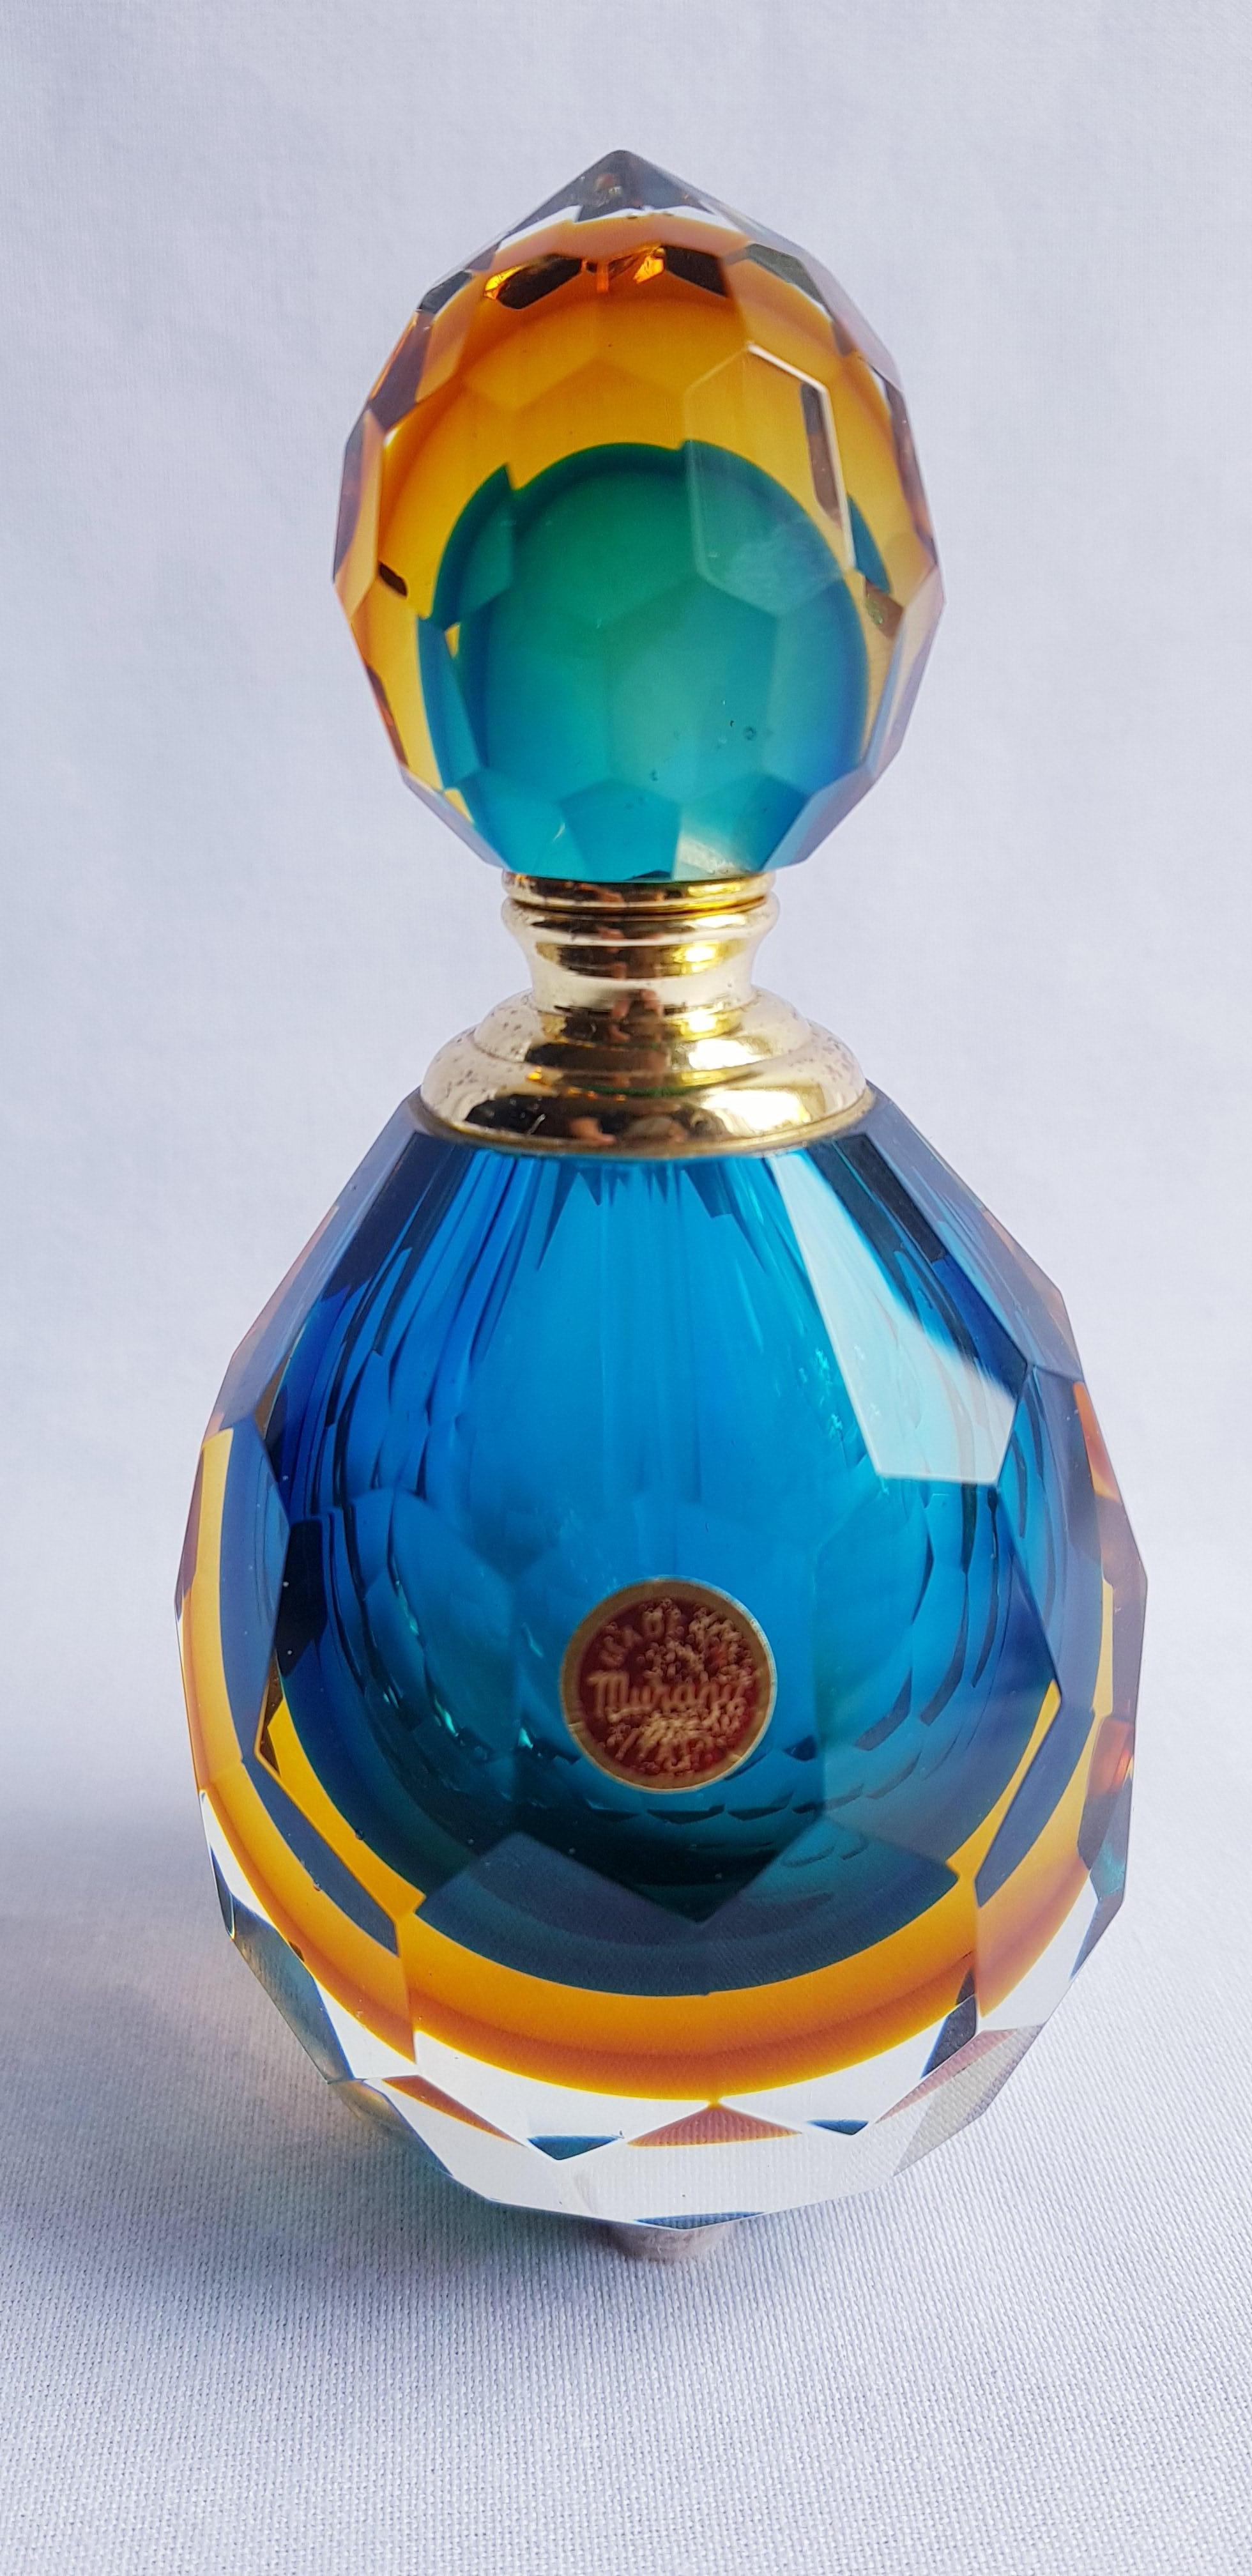 Beautiful vitange murano glass somerso diamond faceted Perfume Bottle by Dona furnace year 1960 brilliant condition.